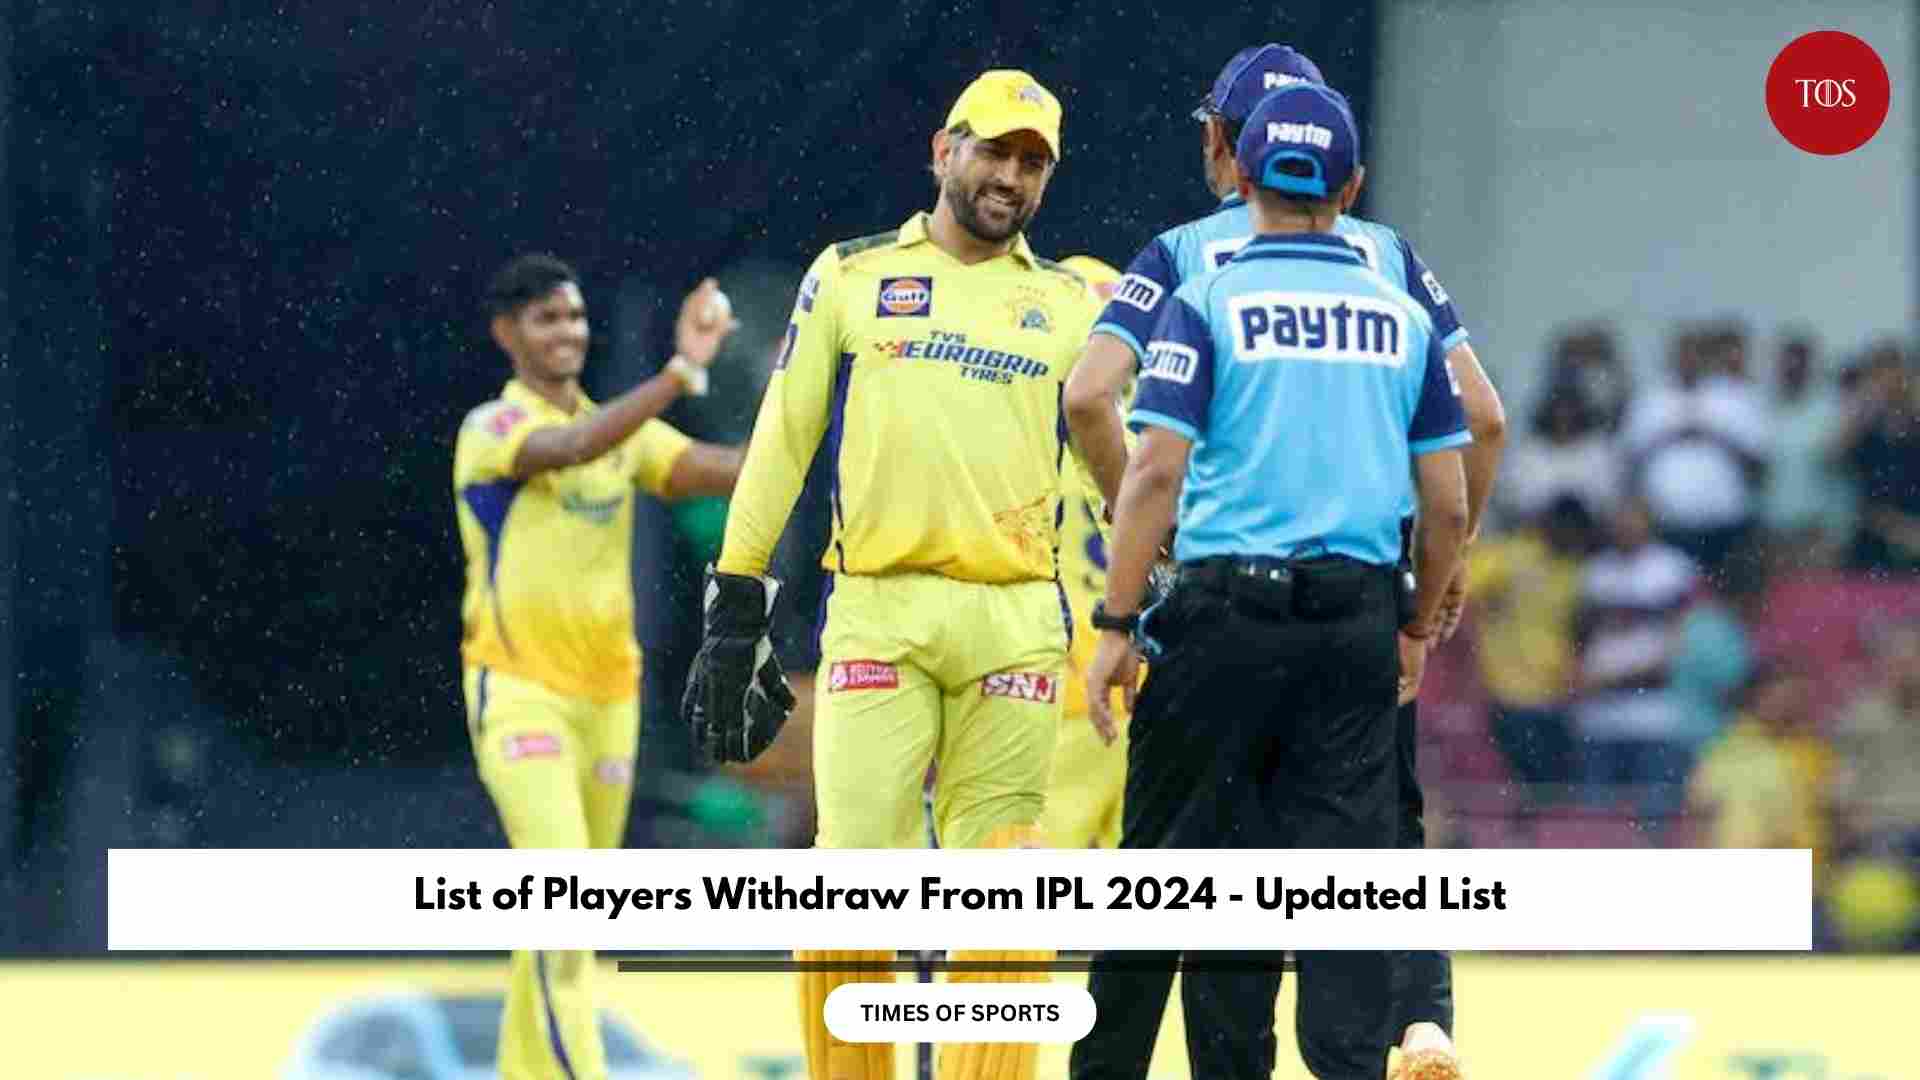 Players Withdraw from IPL 2024